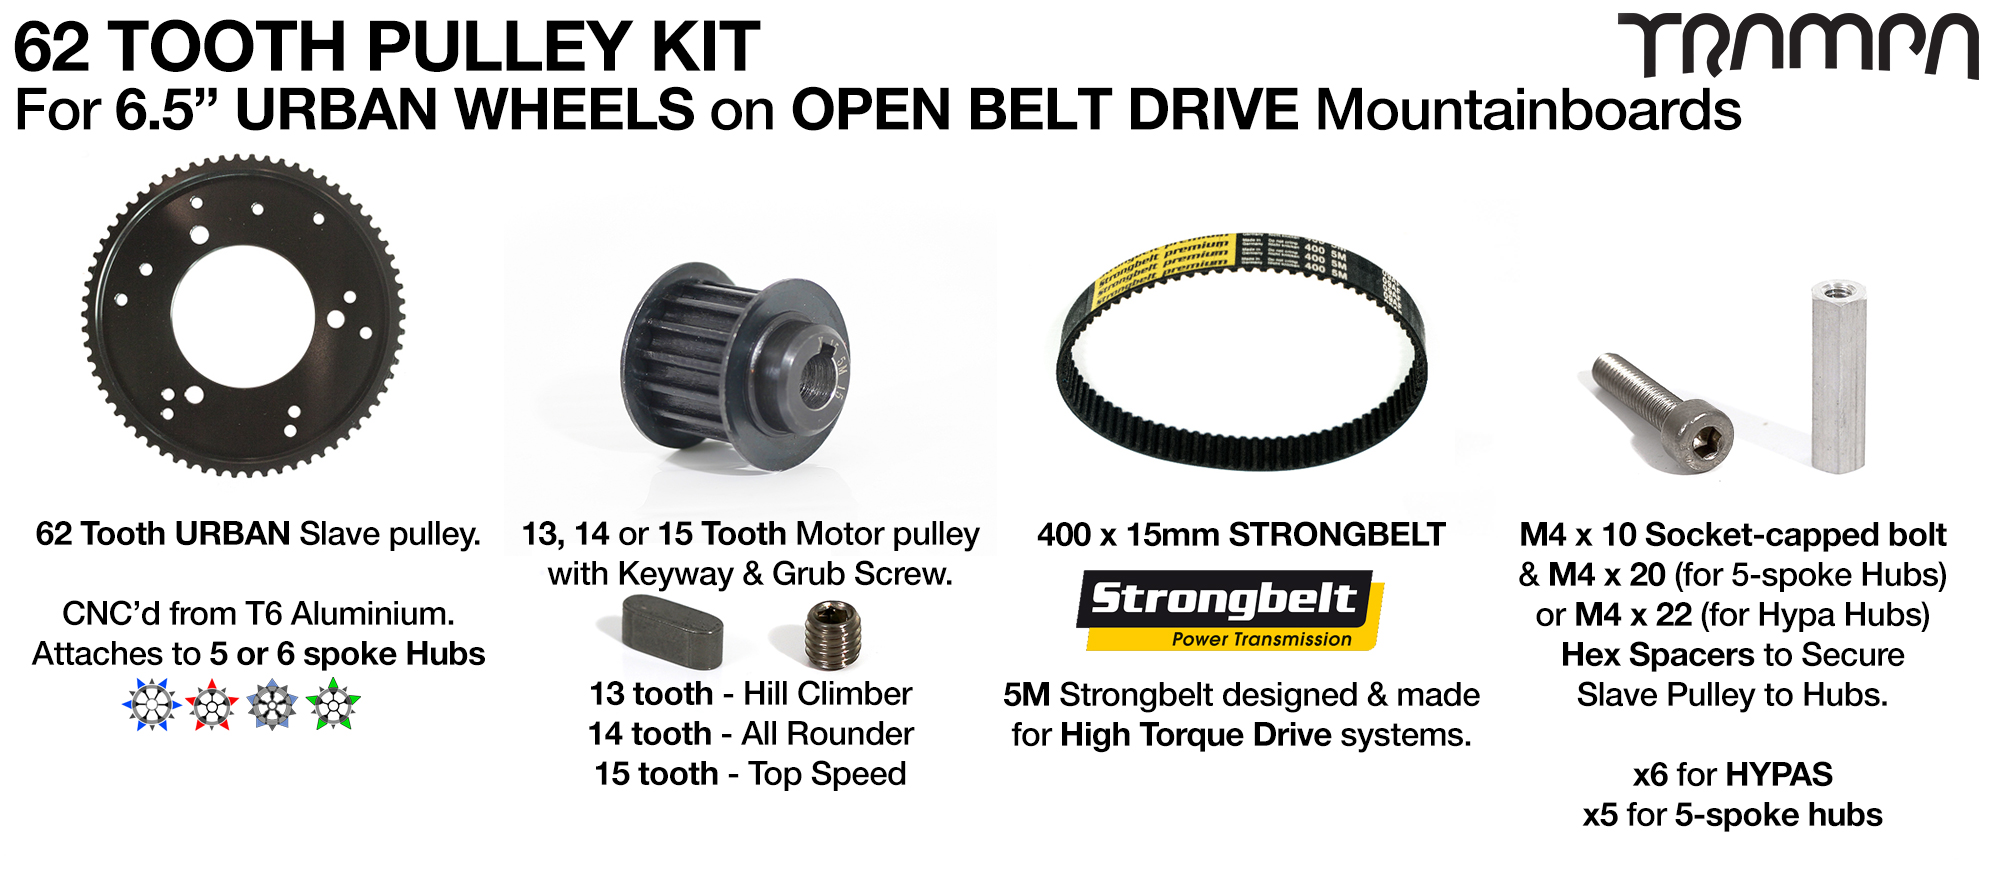 76T OBD 62 Tooth Pulley Kit with 415x 15mm Belt - URBAN Wheels 